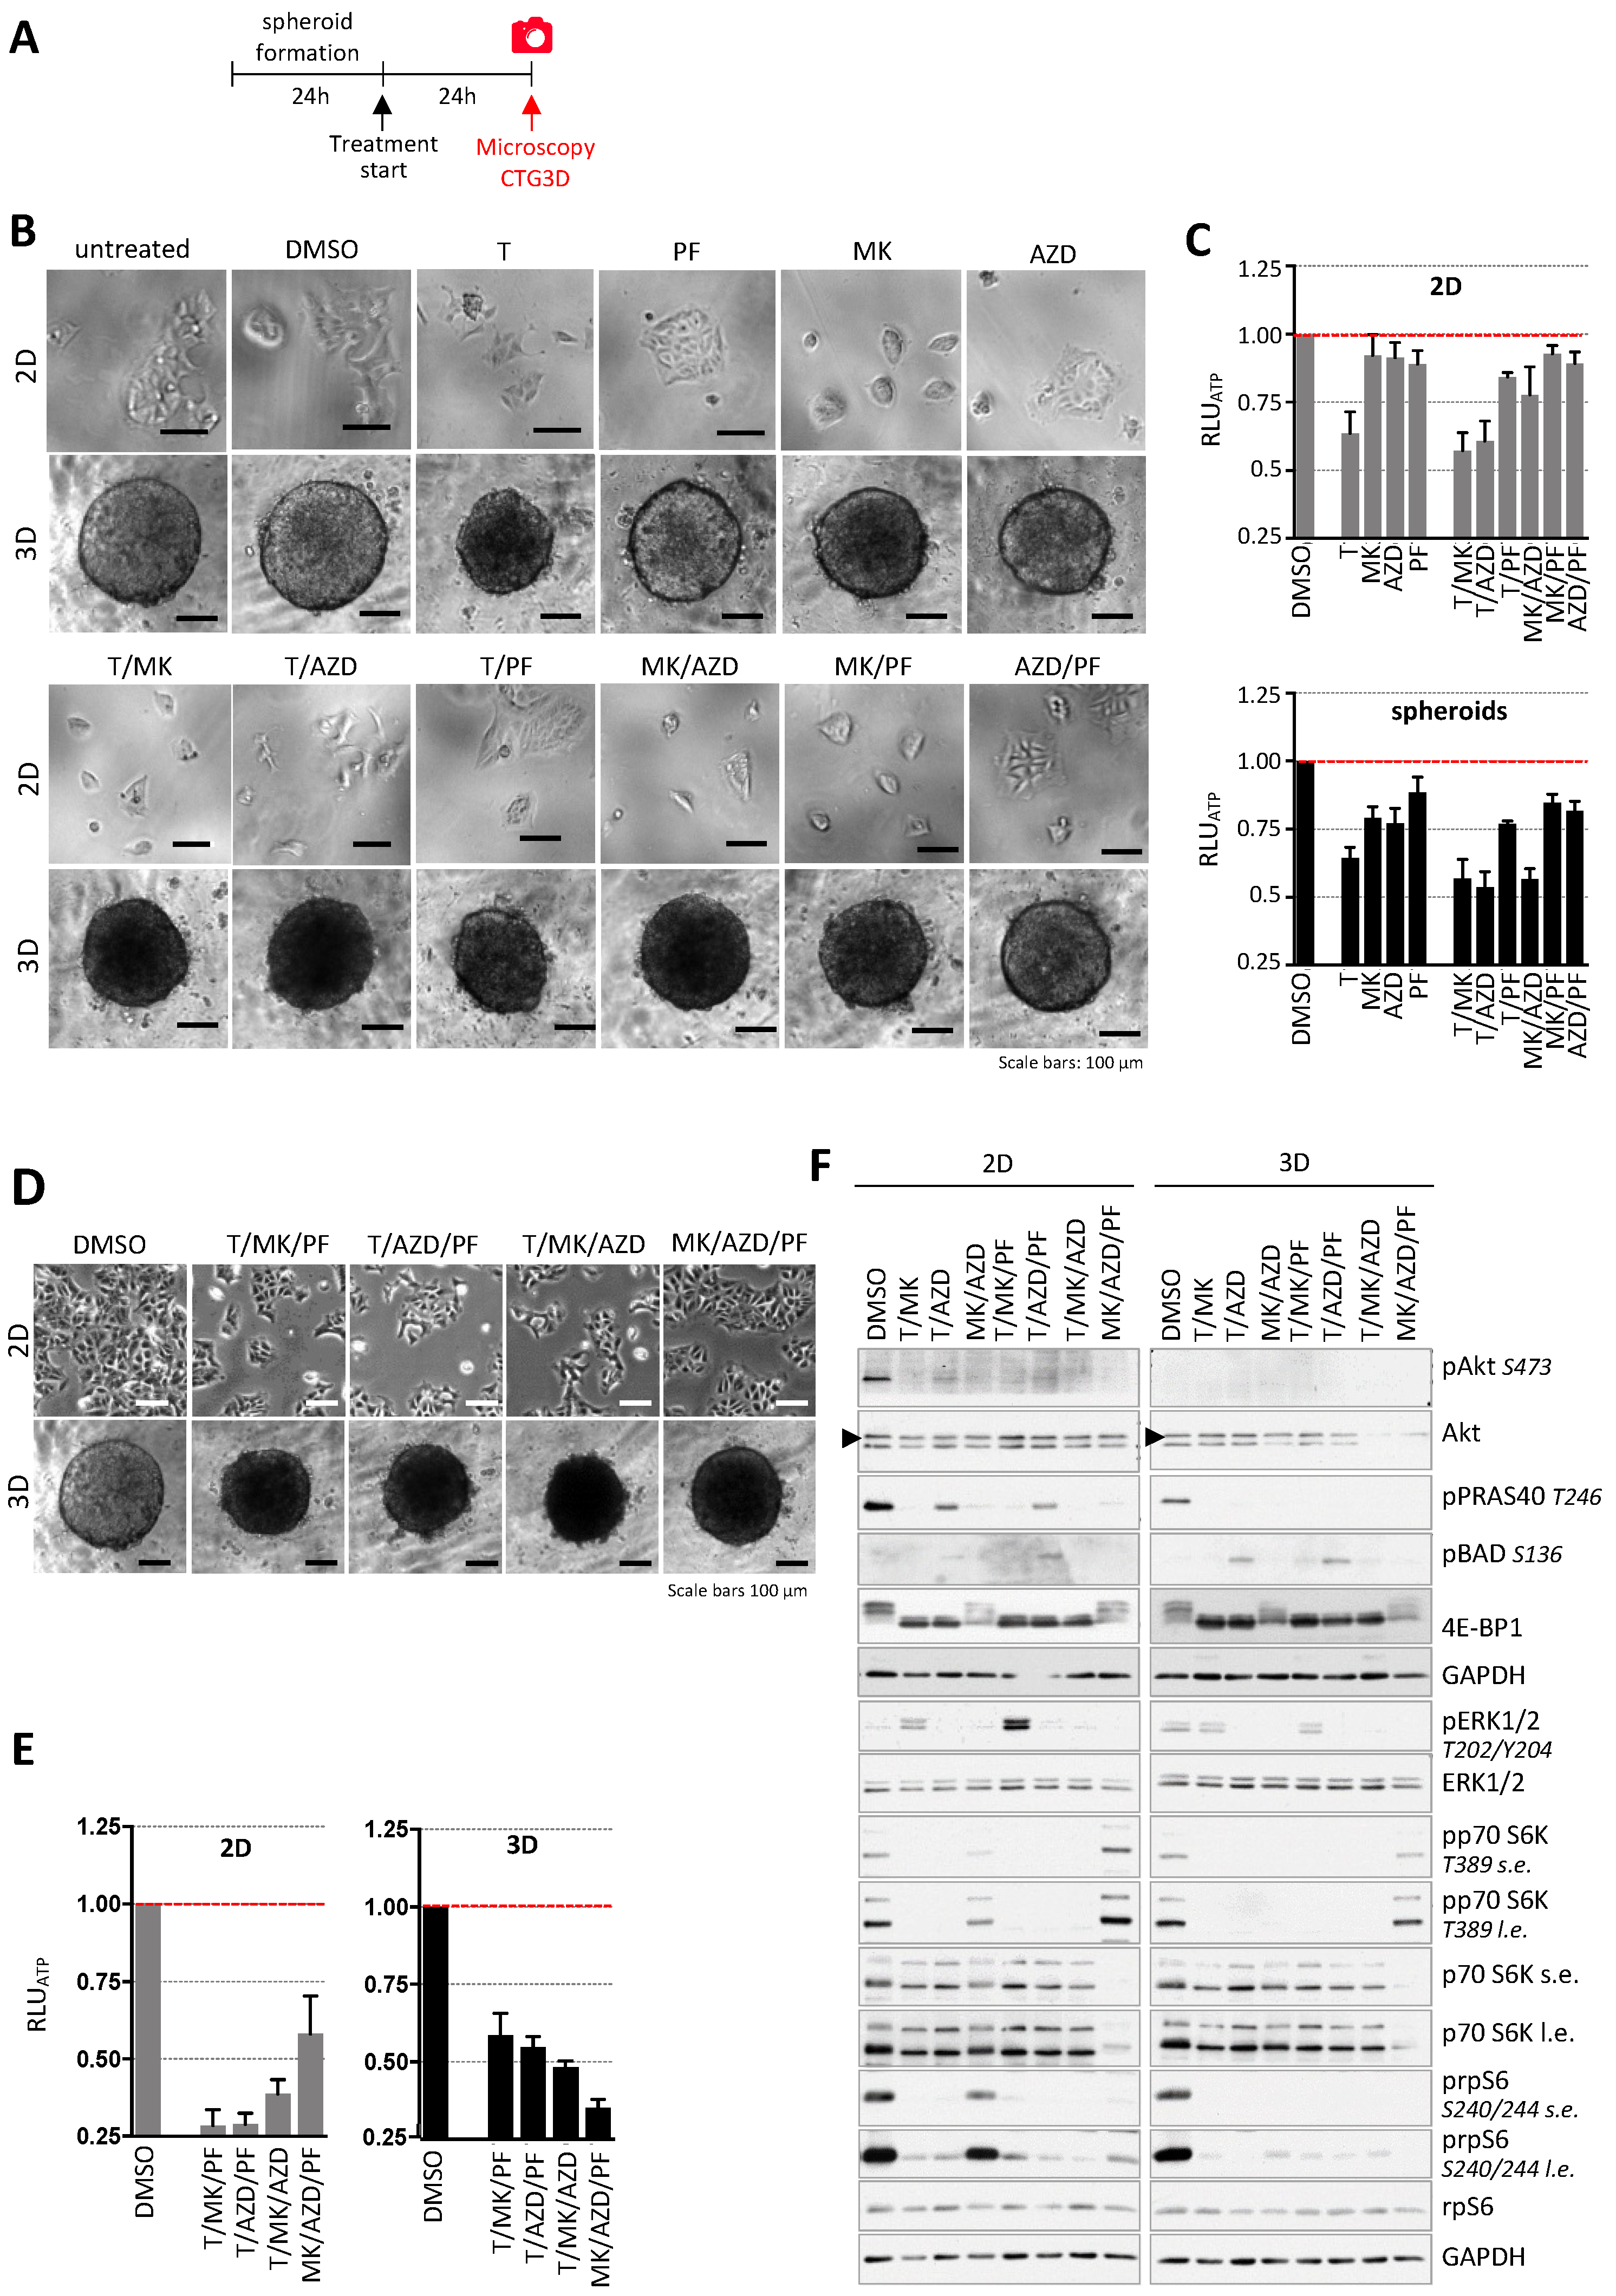 IJMS | Free Full-Text | Selective Eradication of Colon Cancer Cells  Harboring PI3K and/or MAPK Pathway Mutations in 3D Culture by Combined  PI3K/AKT/mTOR Pathway and MEK Inhibition